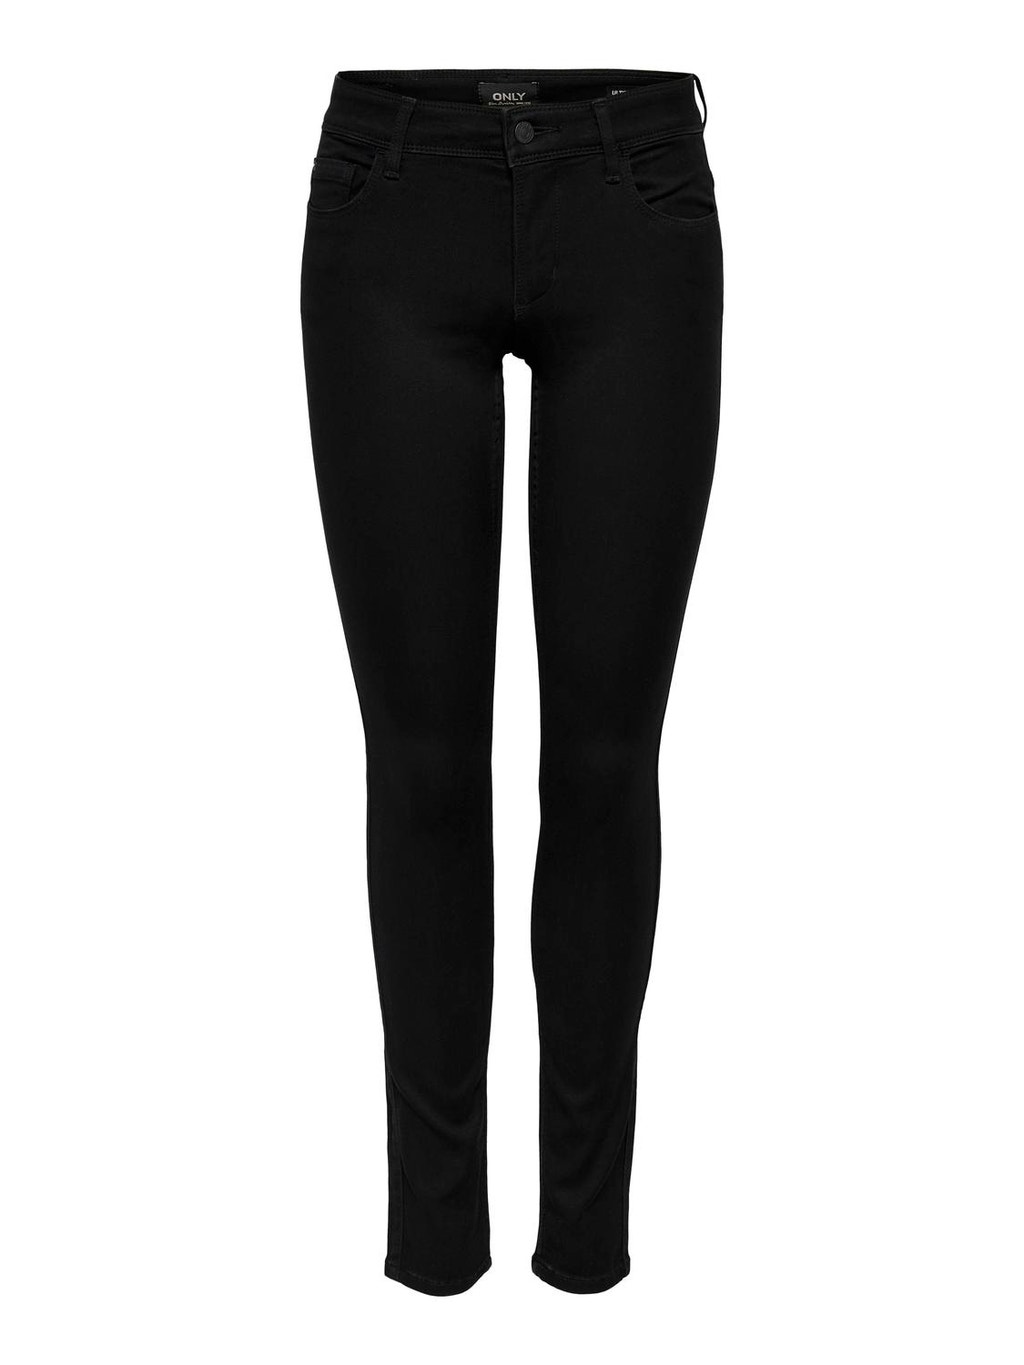 ONLUltimate king reg Skinny fit jeans with 20% discount! | ONLY®